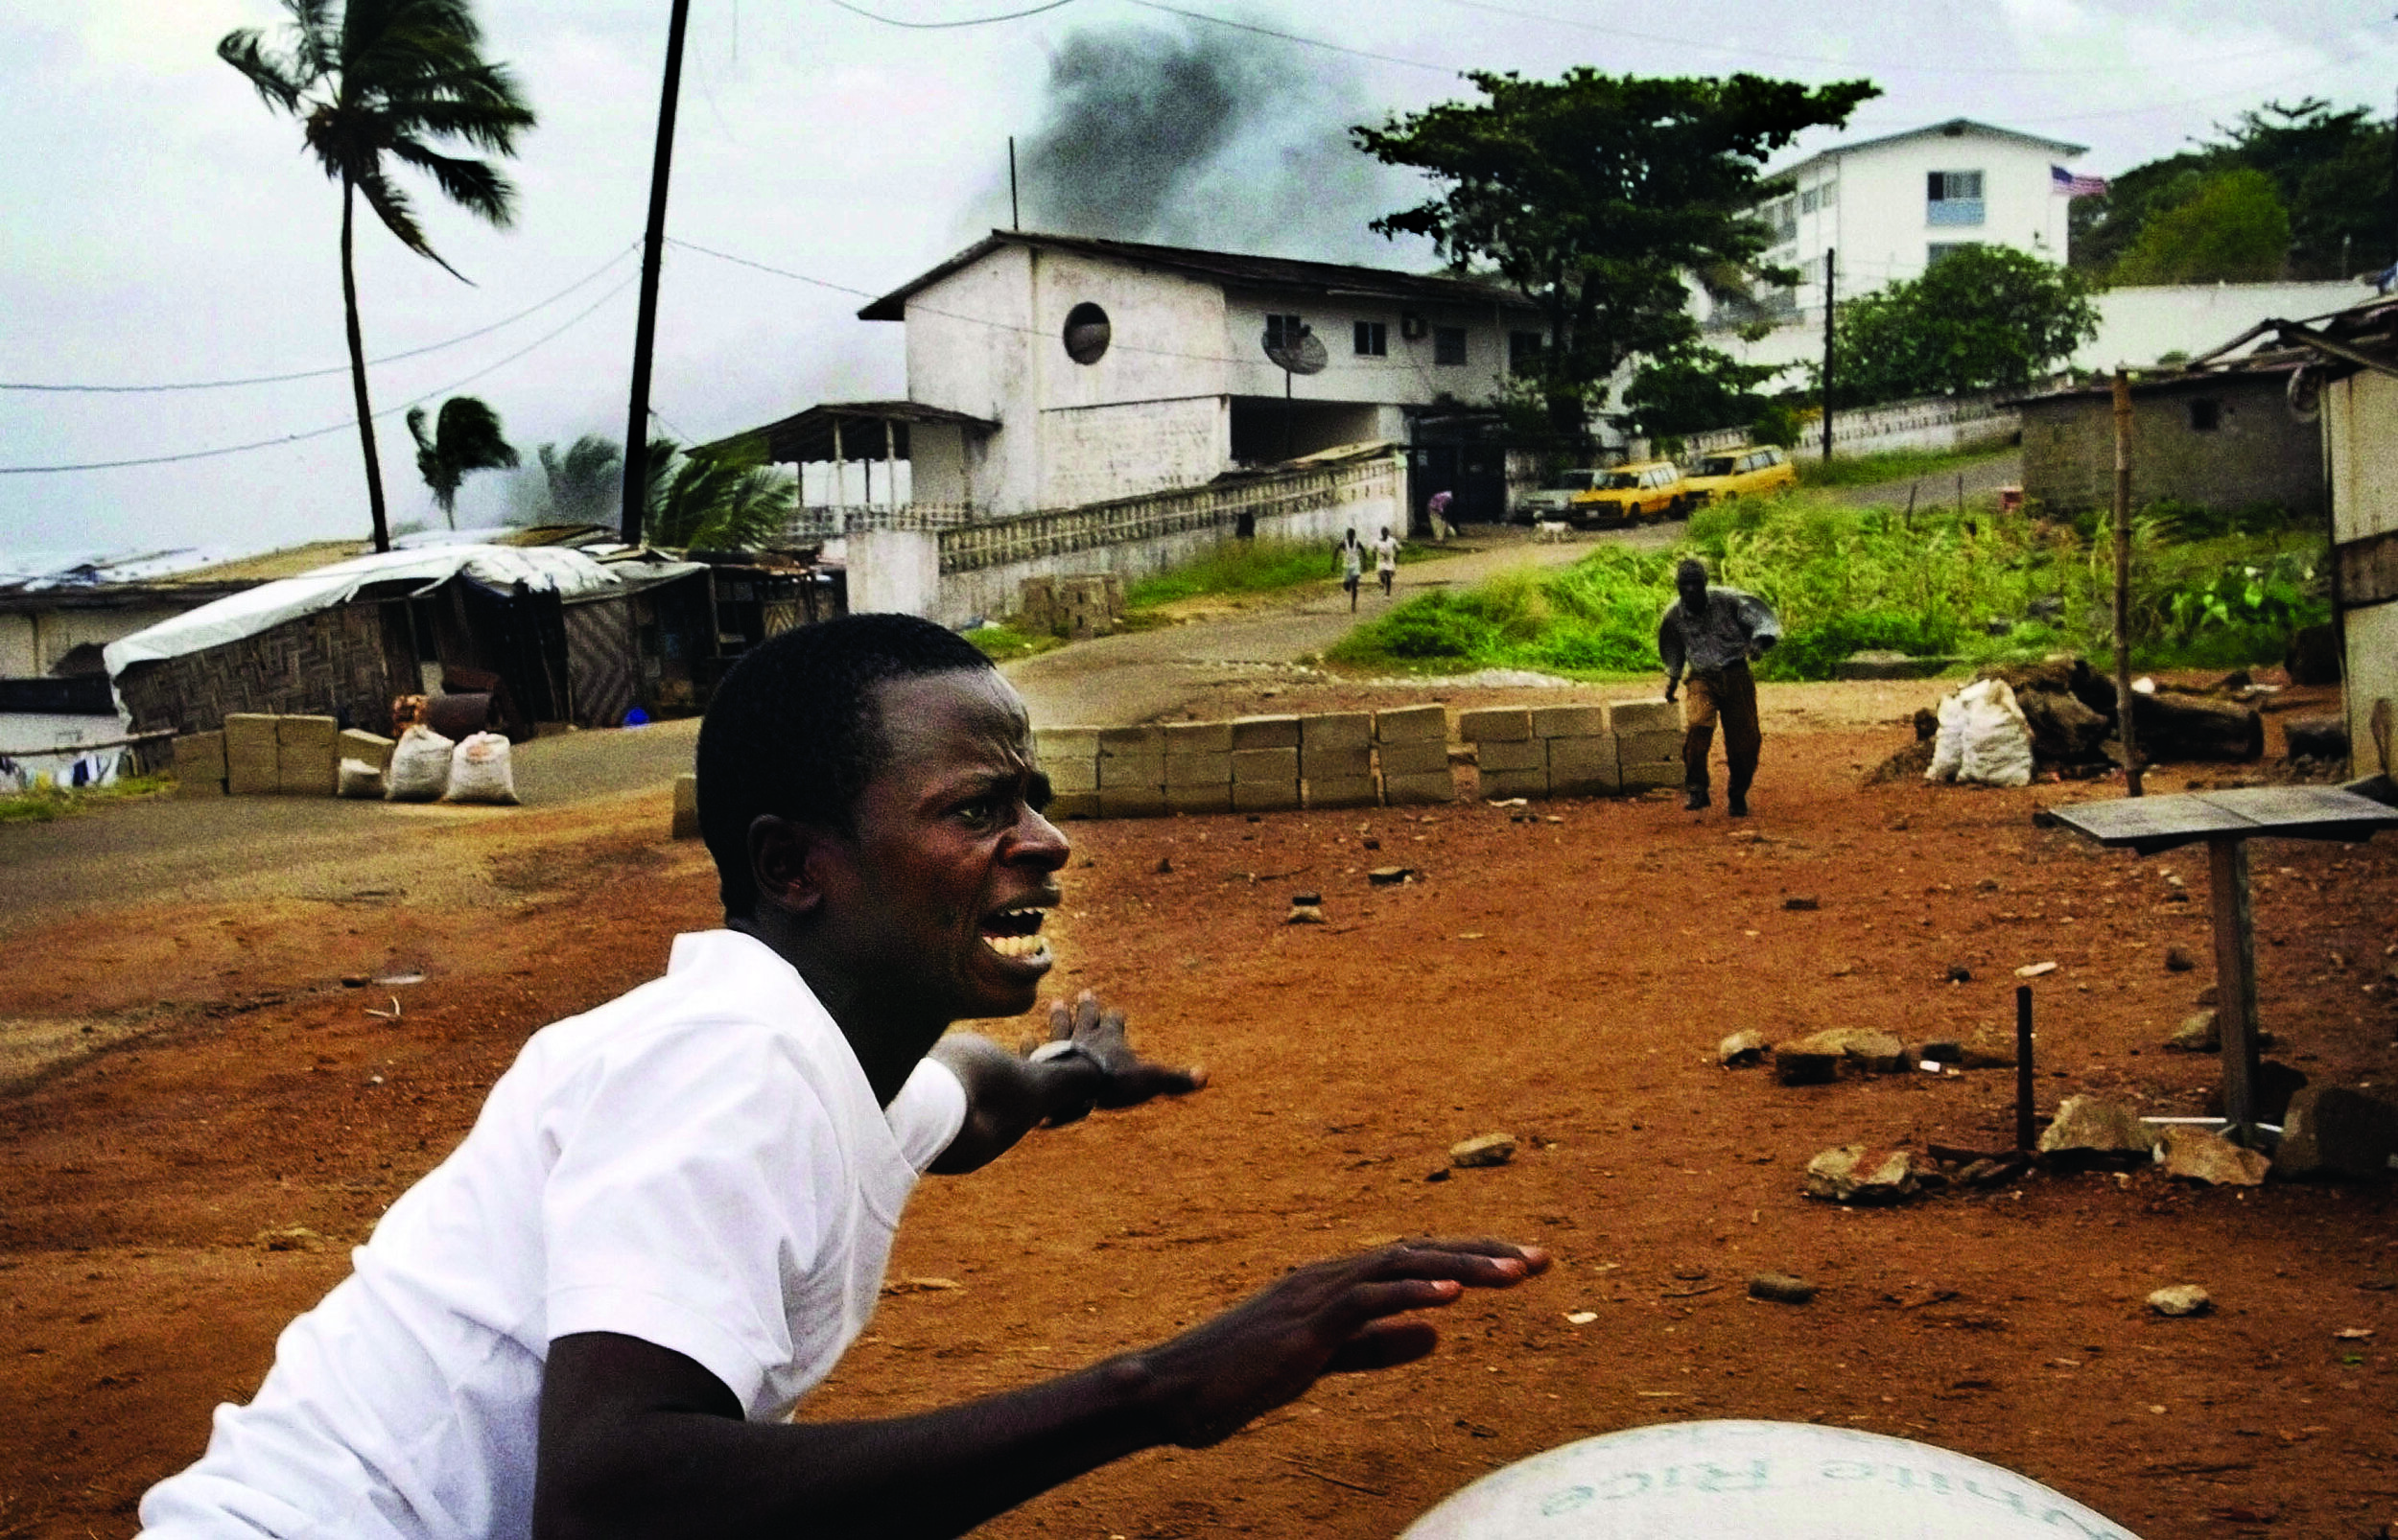  Liberians scatter in fear as a mortar shell explodes near them (background) on July 21, 2003, in Monrovia. © Chris Hondros/Getty Images 